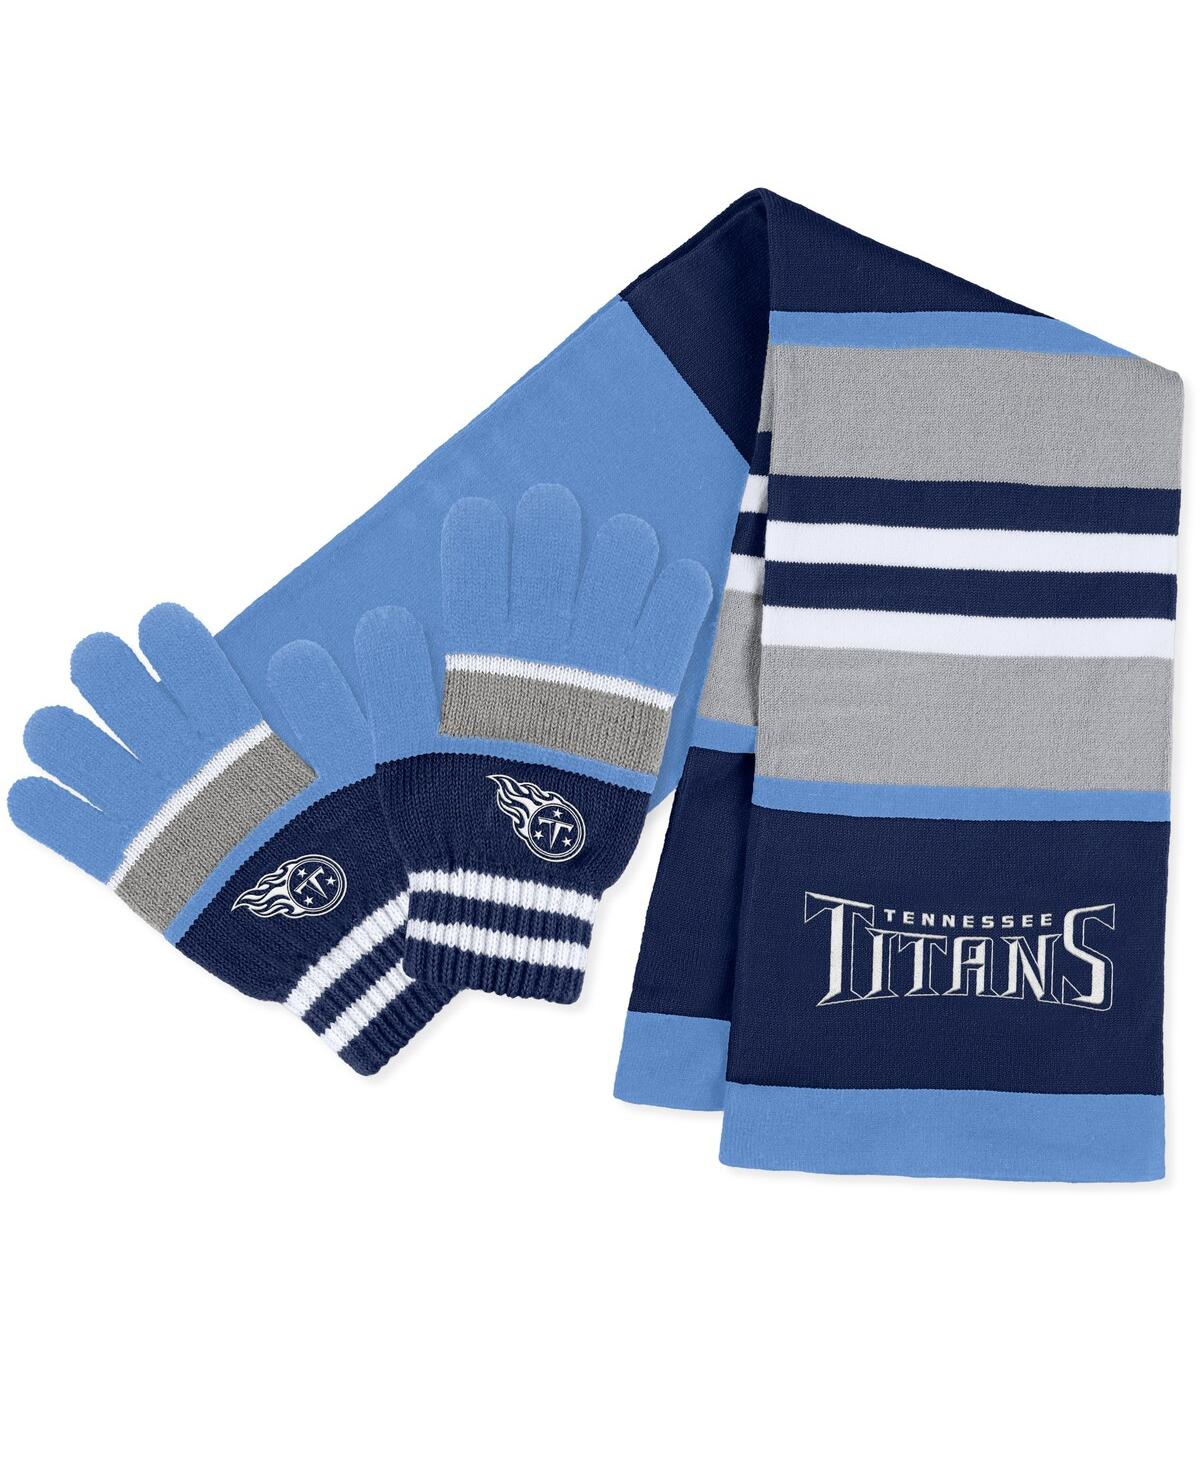 Wear By Erin Andrews Women's  Tennessee Titans Stripe Glove And Scarf Set In Blue